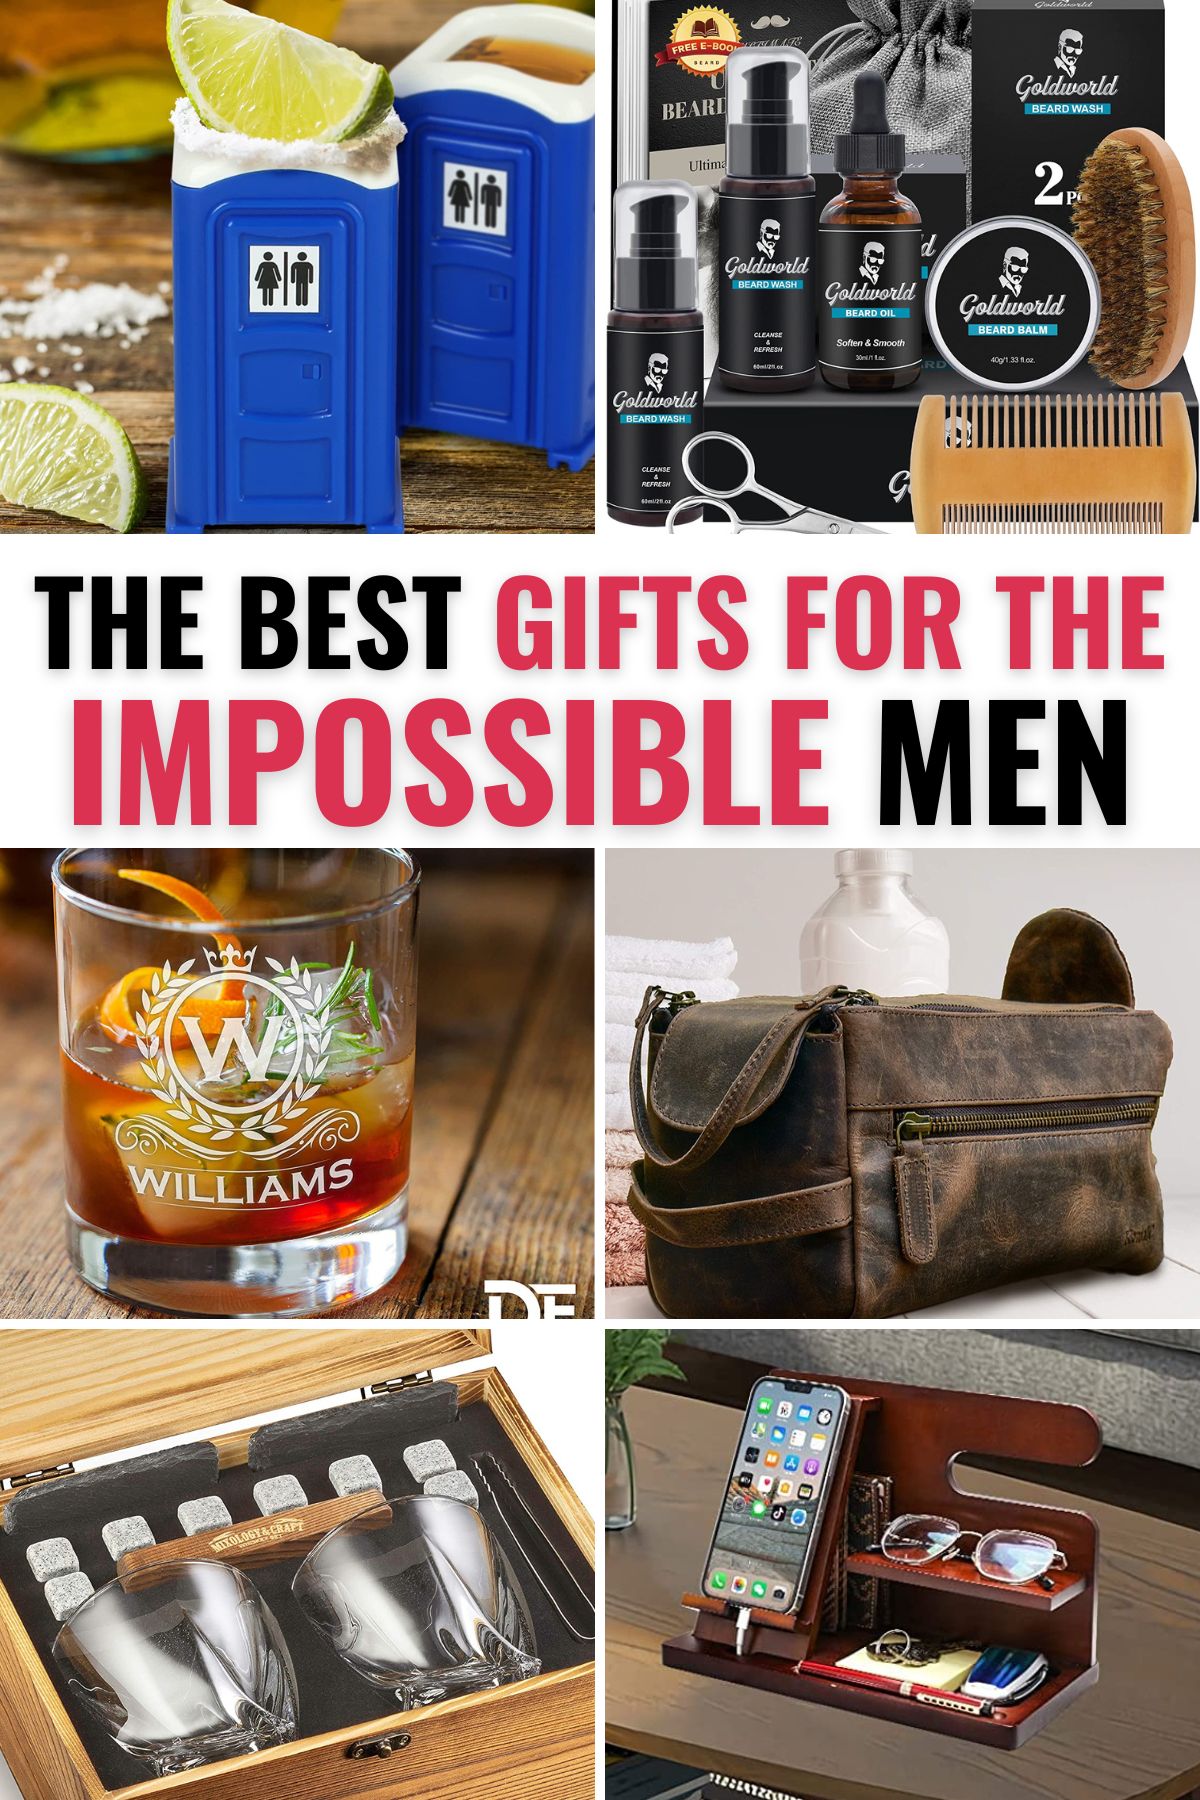 The Best Gifts for the Impossible Man – SPY